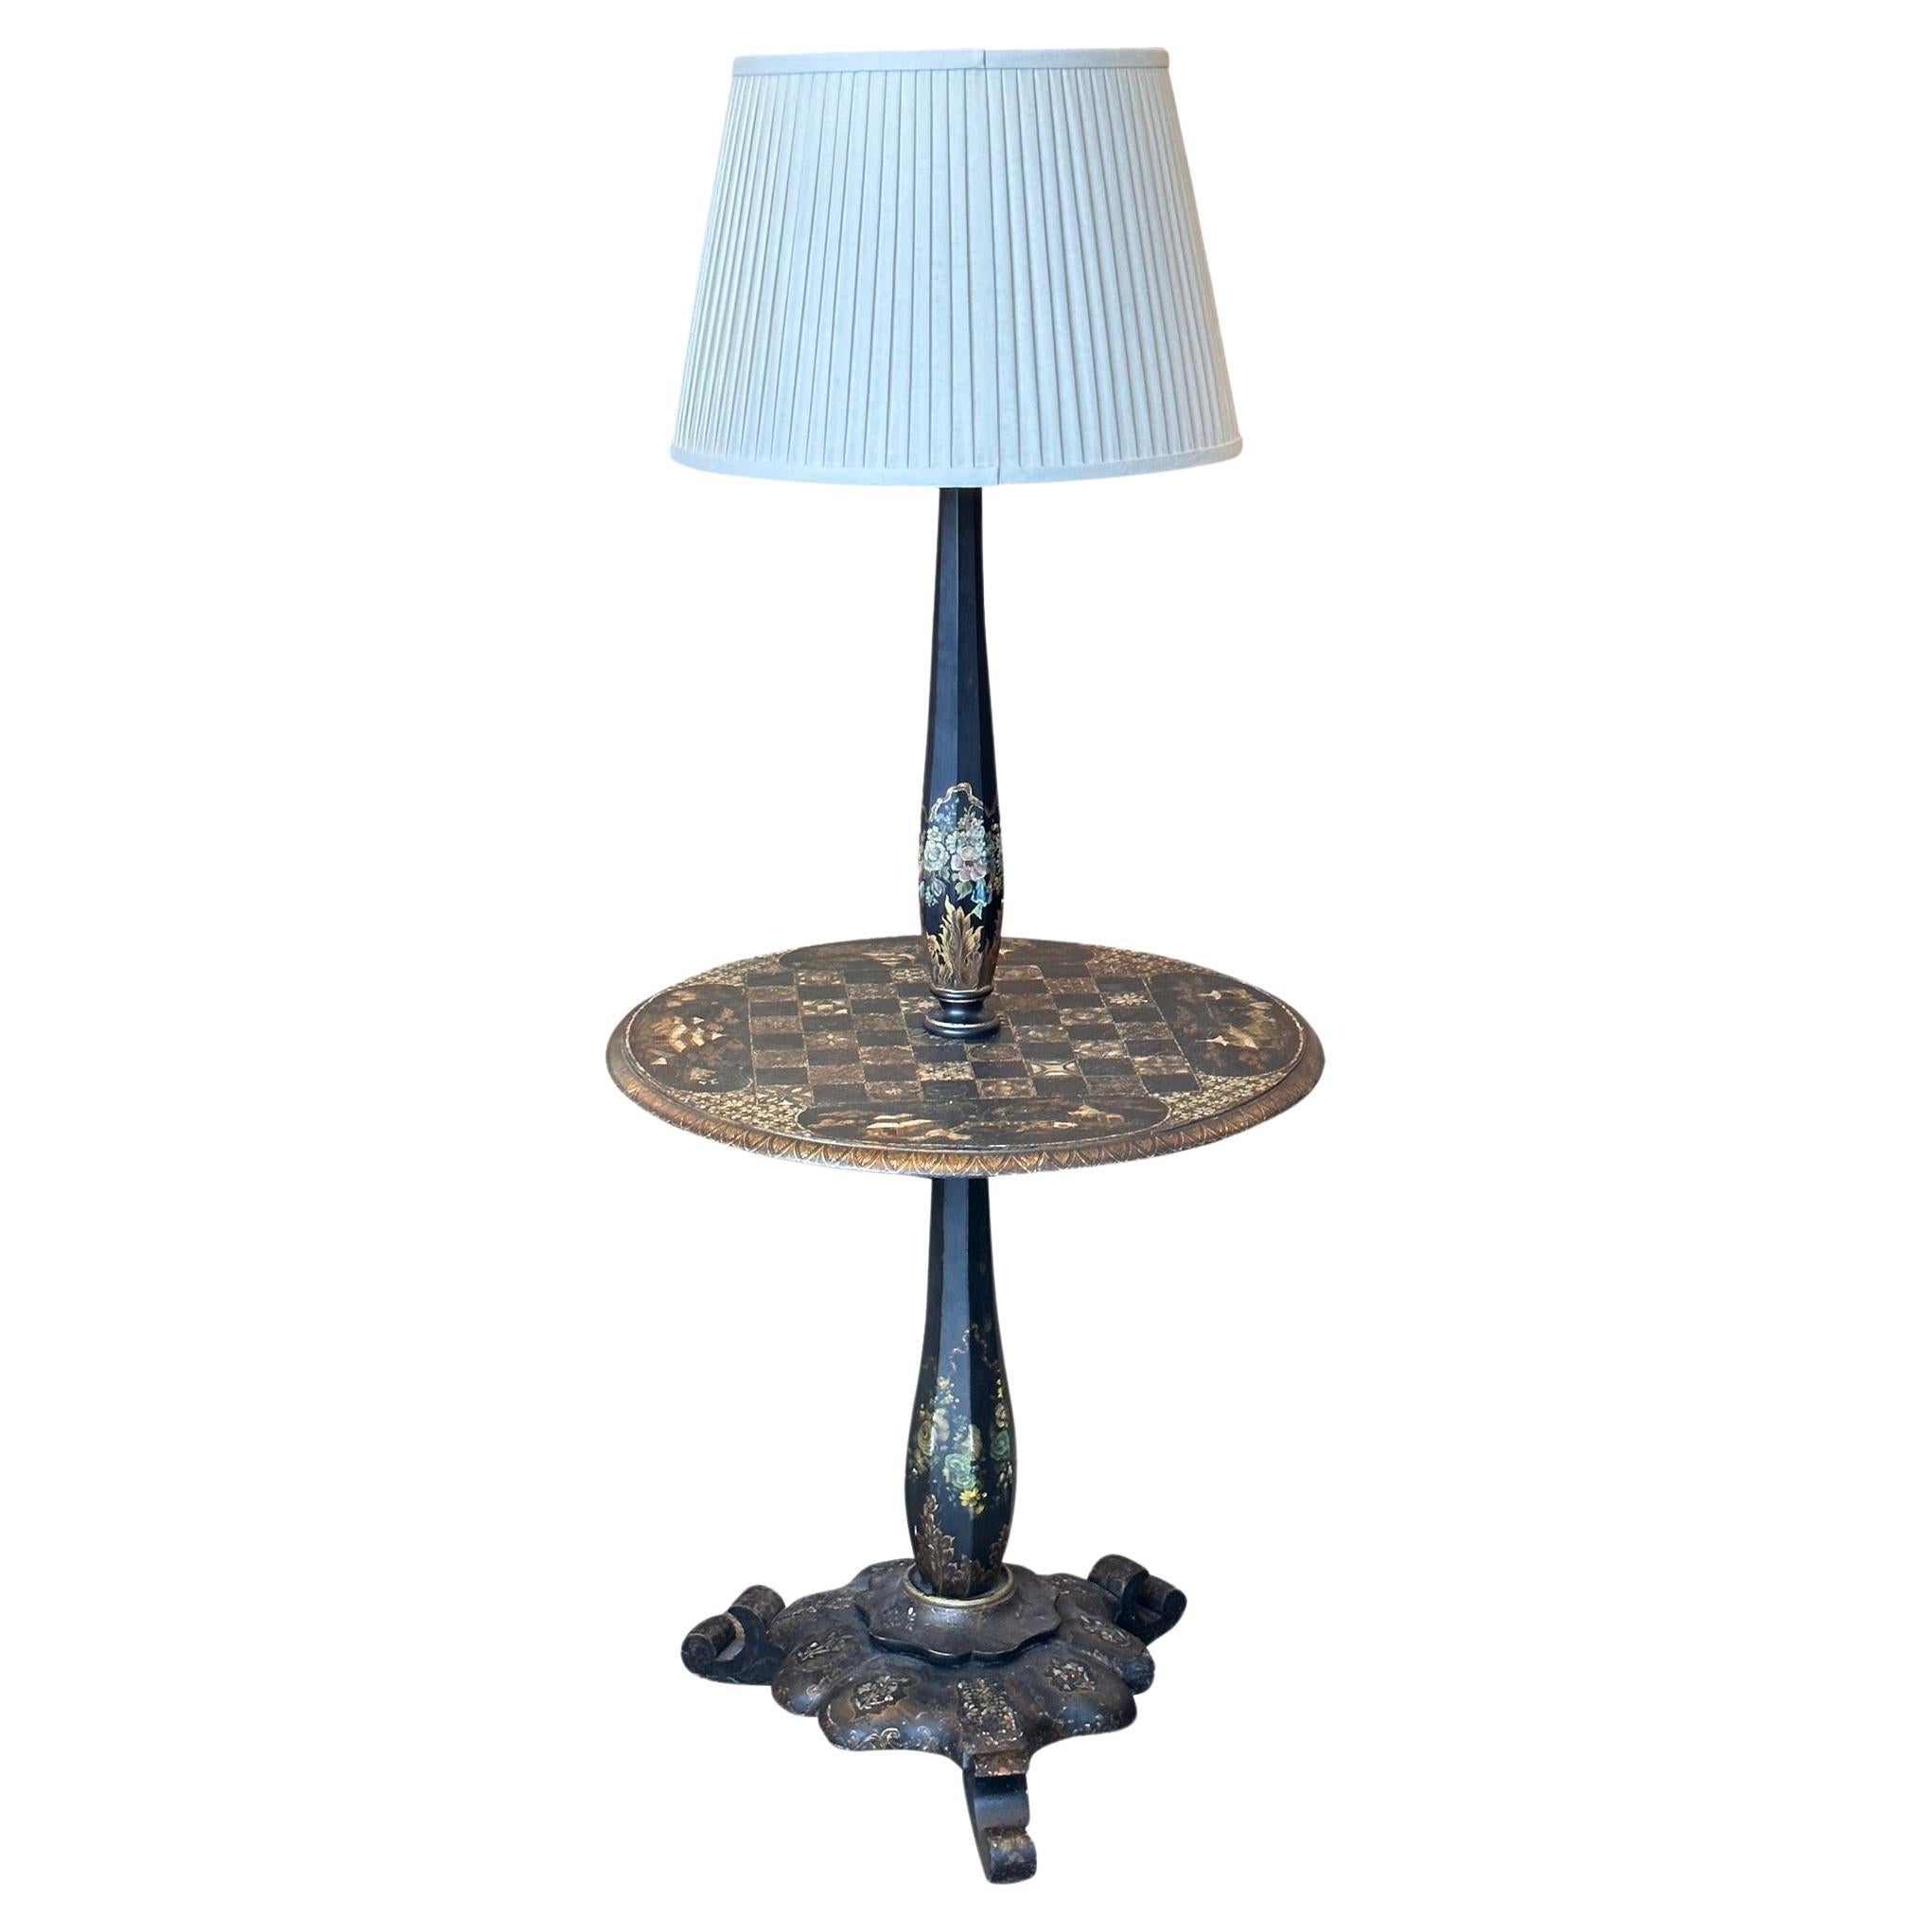 1920s Chinoiserie Decorated Floor Lamp